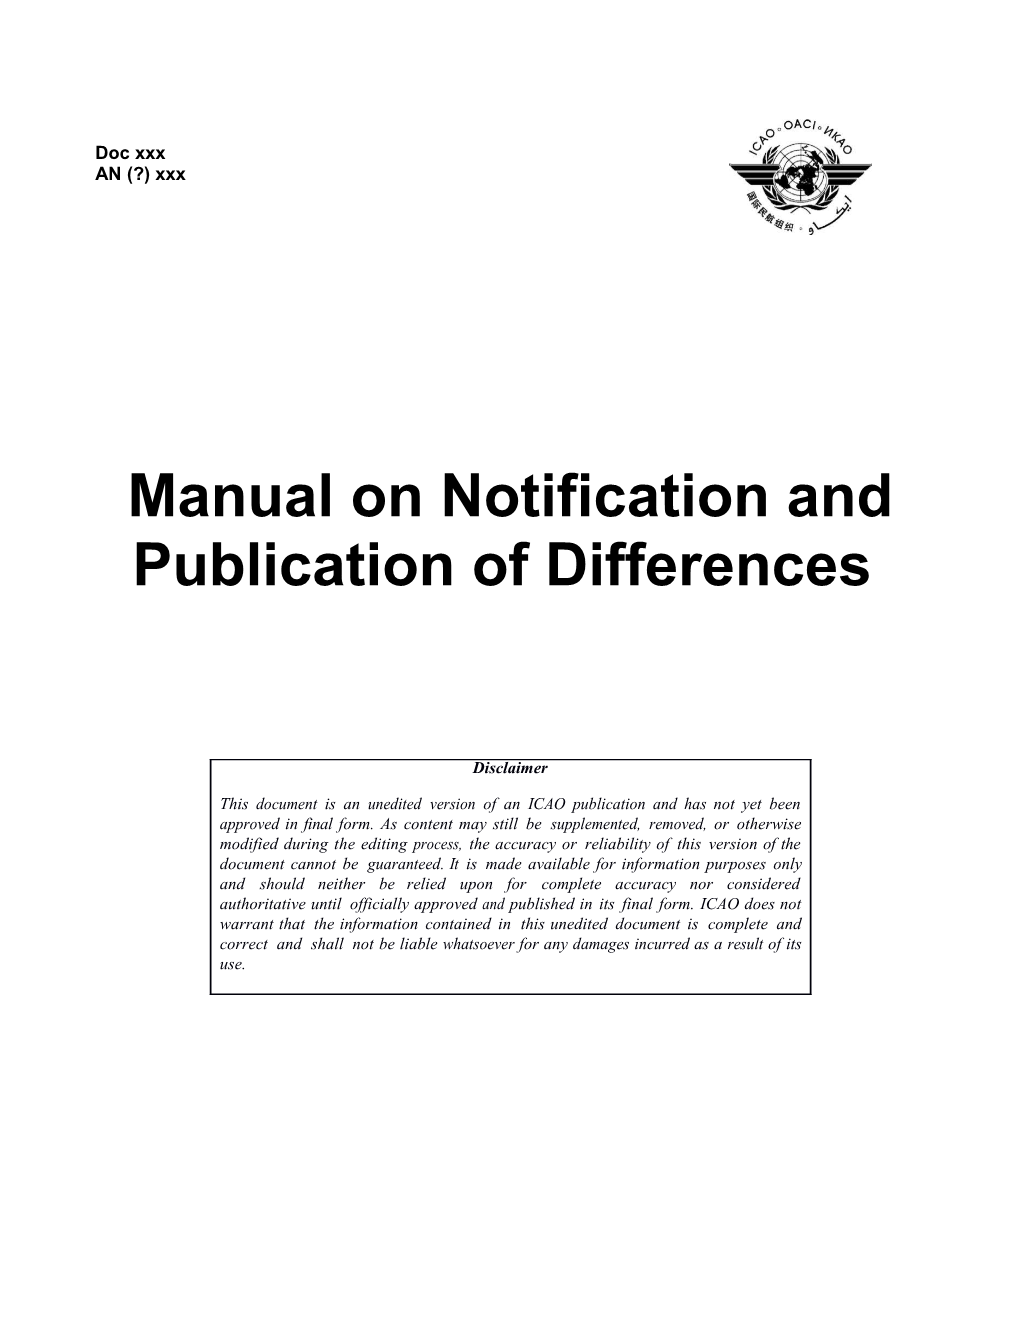 Manual on Notification and Publication of Differences